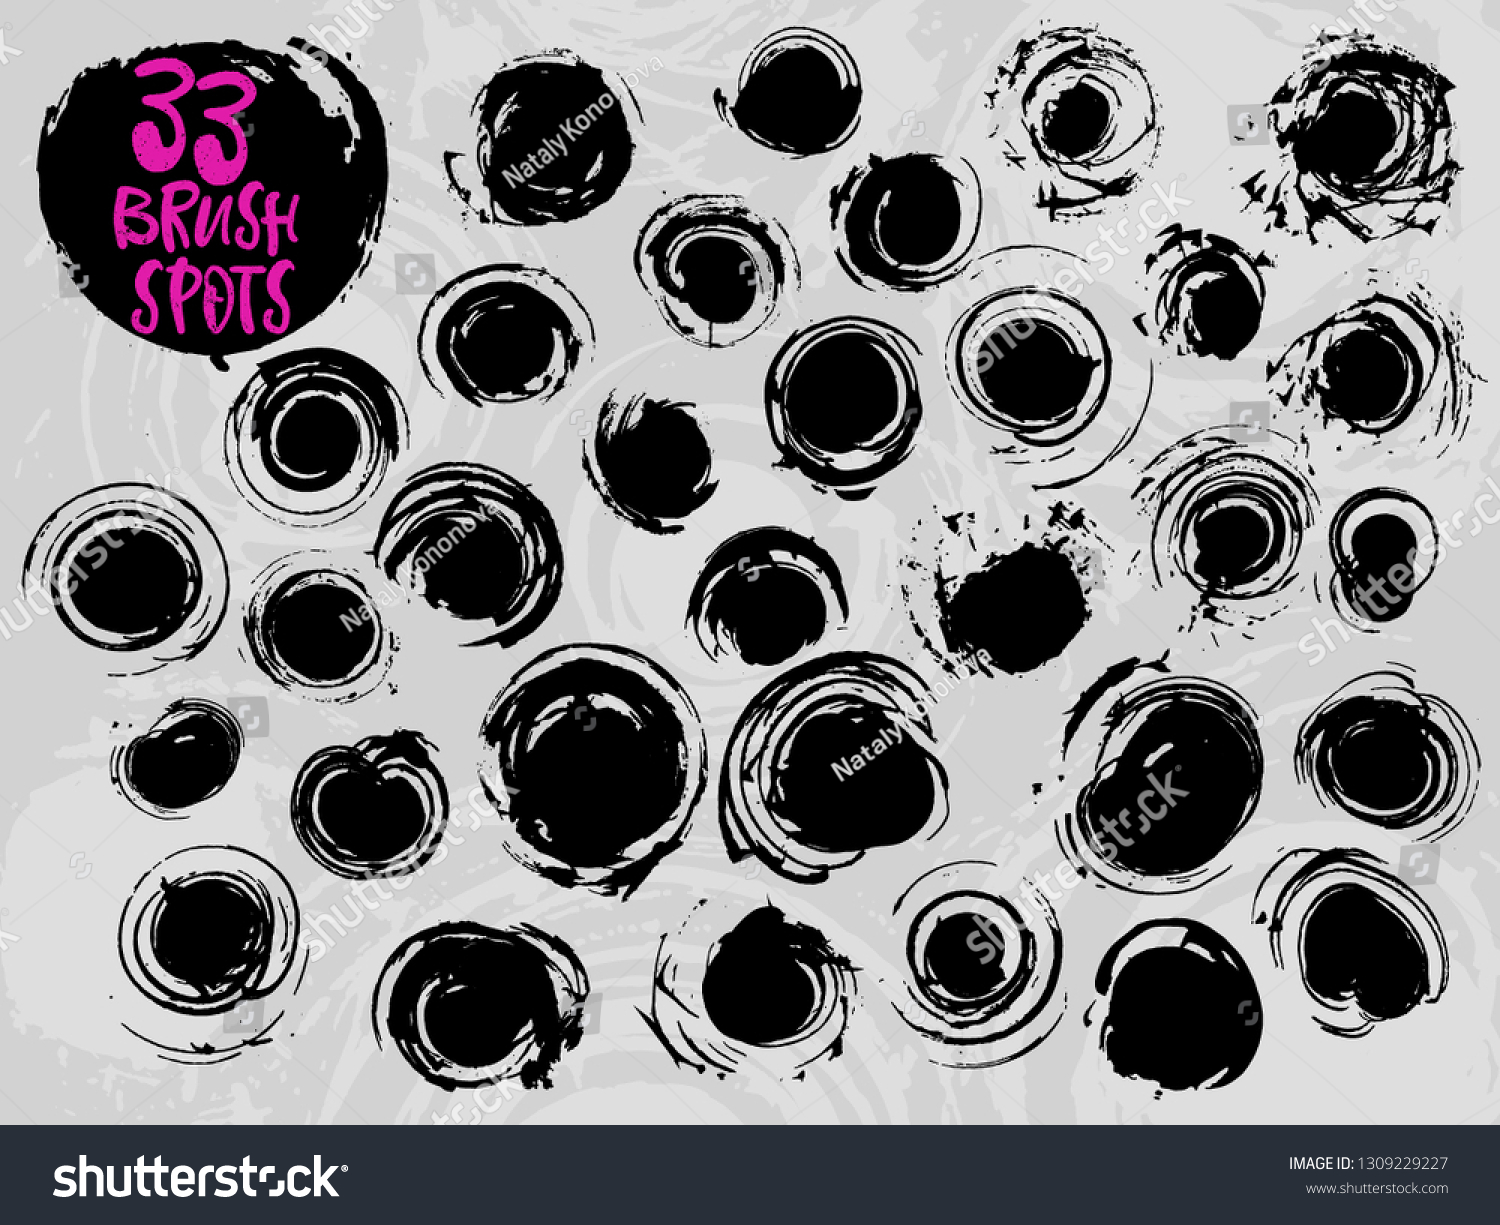 SVG of Thirty three brush painted circle spots. A large set of handdrawn grunge shapes. Collection of isolated inked objects for prints, web-design, greeting and invitation cards, wrapping paper. svg